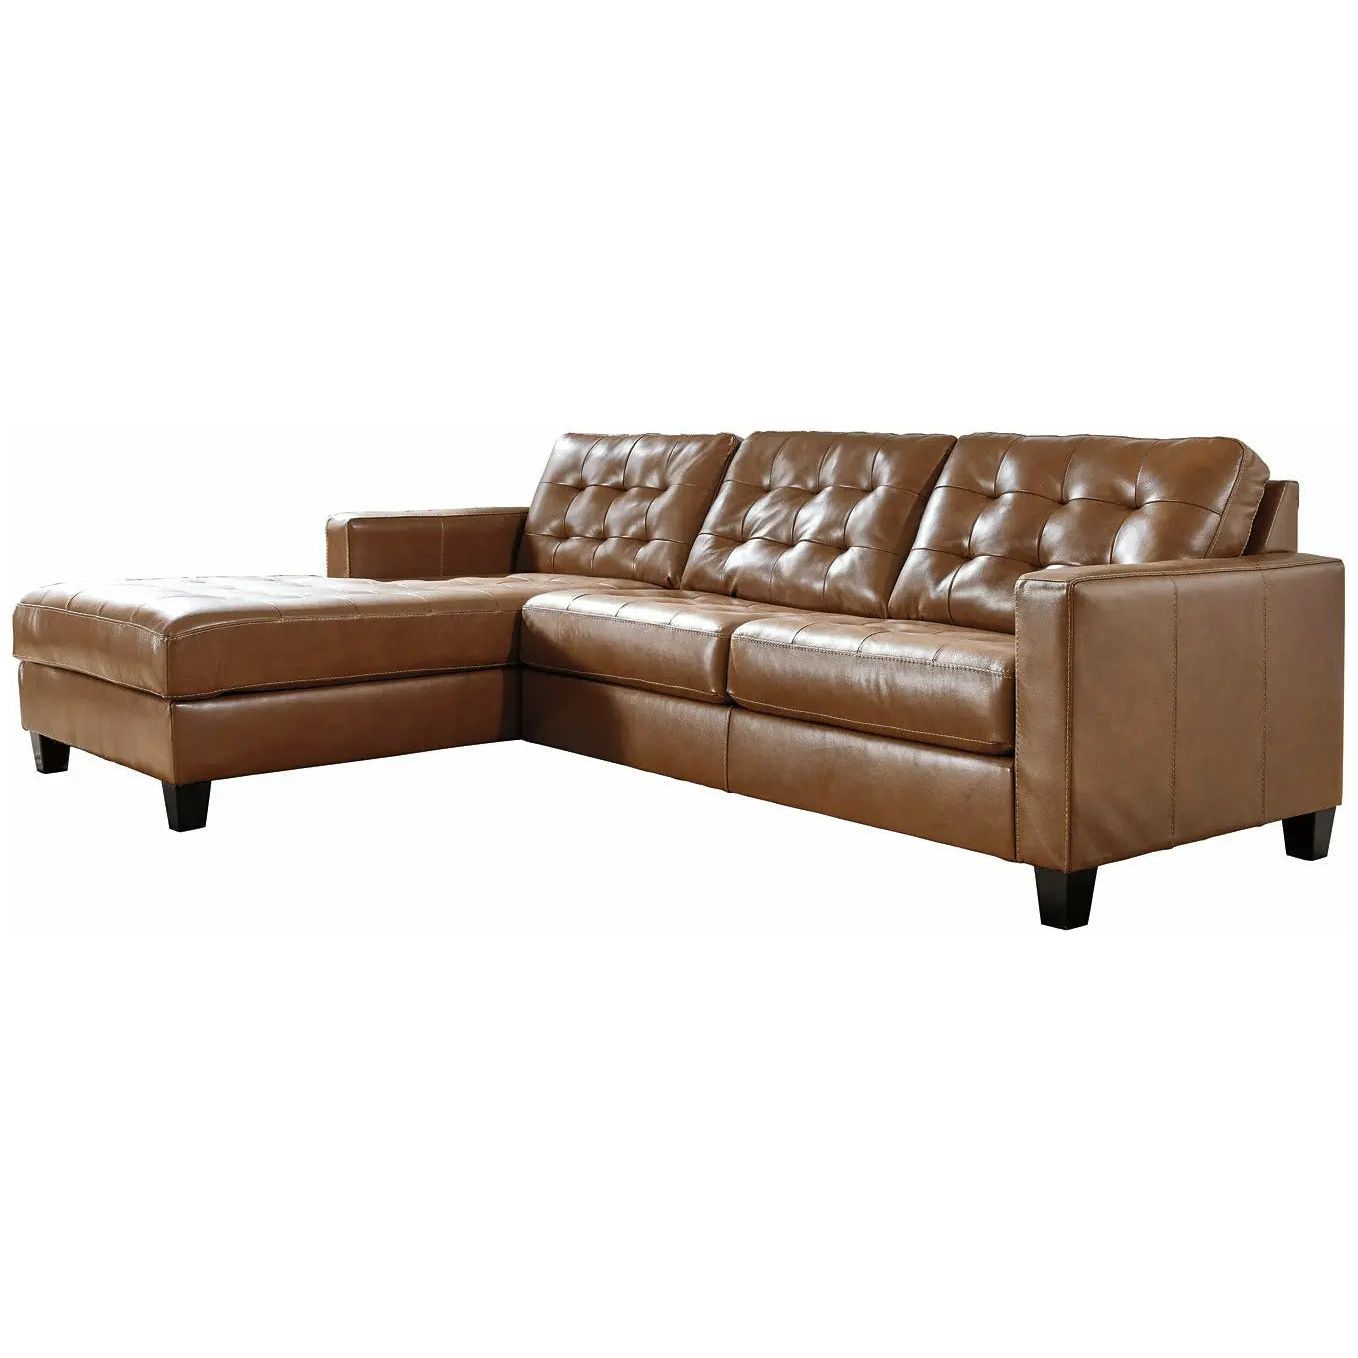 Baskove 2-Piece Sectional with Chaise SOFA